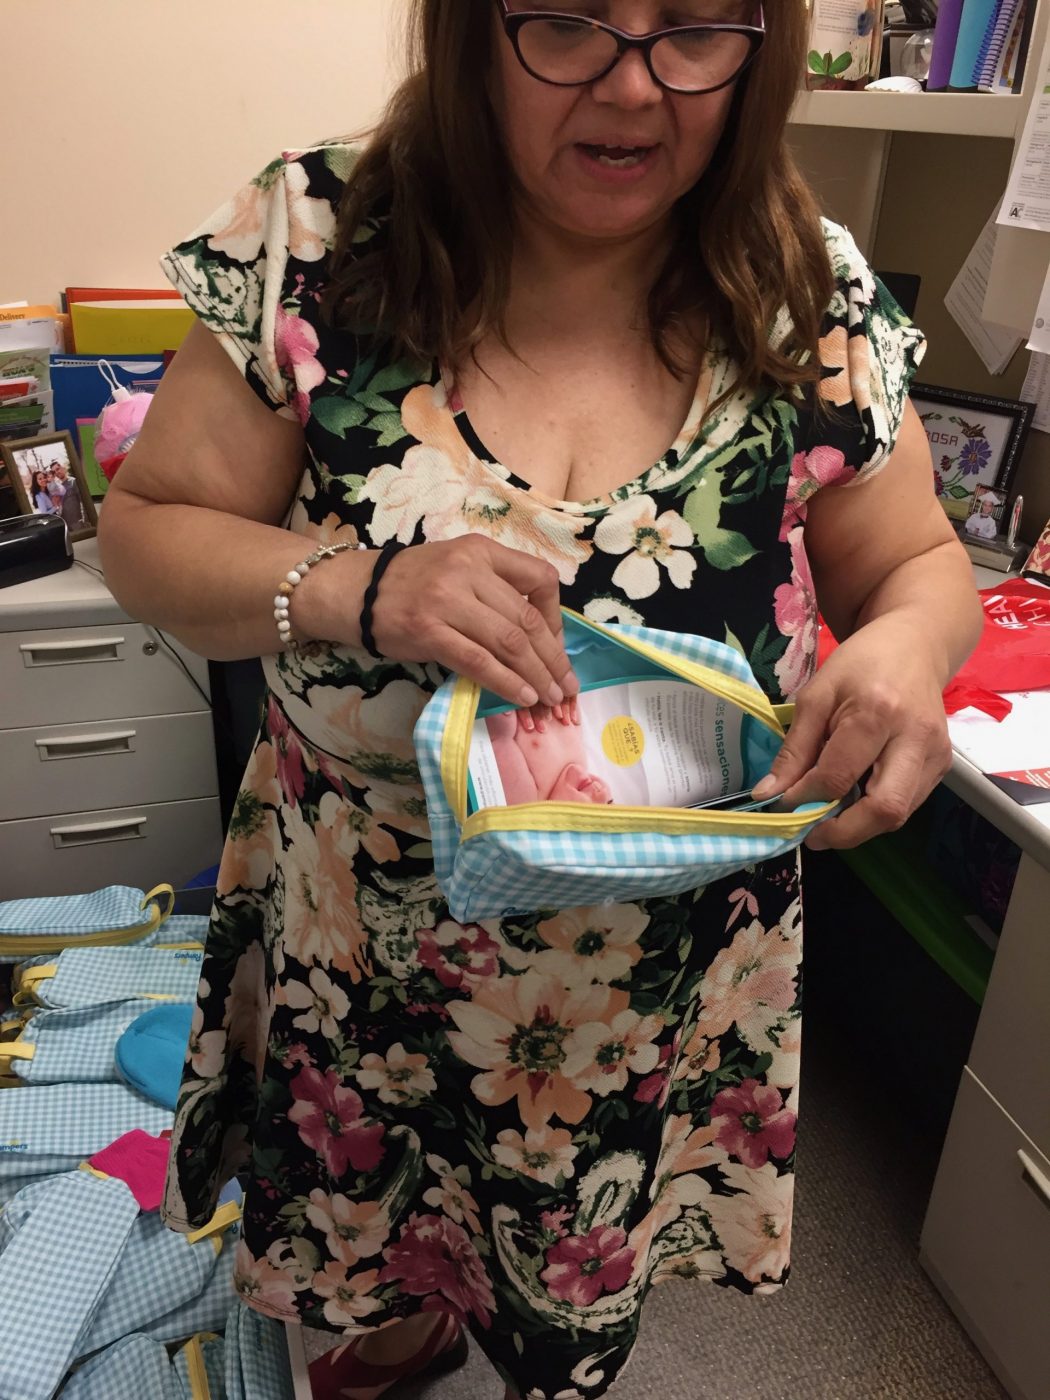 Woman in floral dress standing, holding open a small baby blue pouch with pamphlets inside